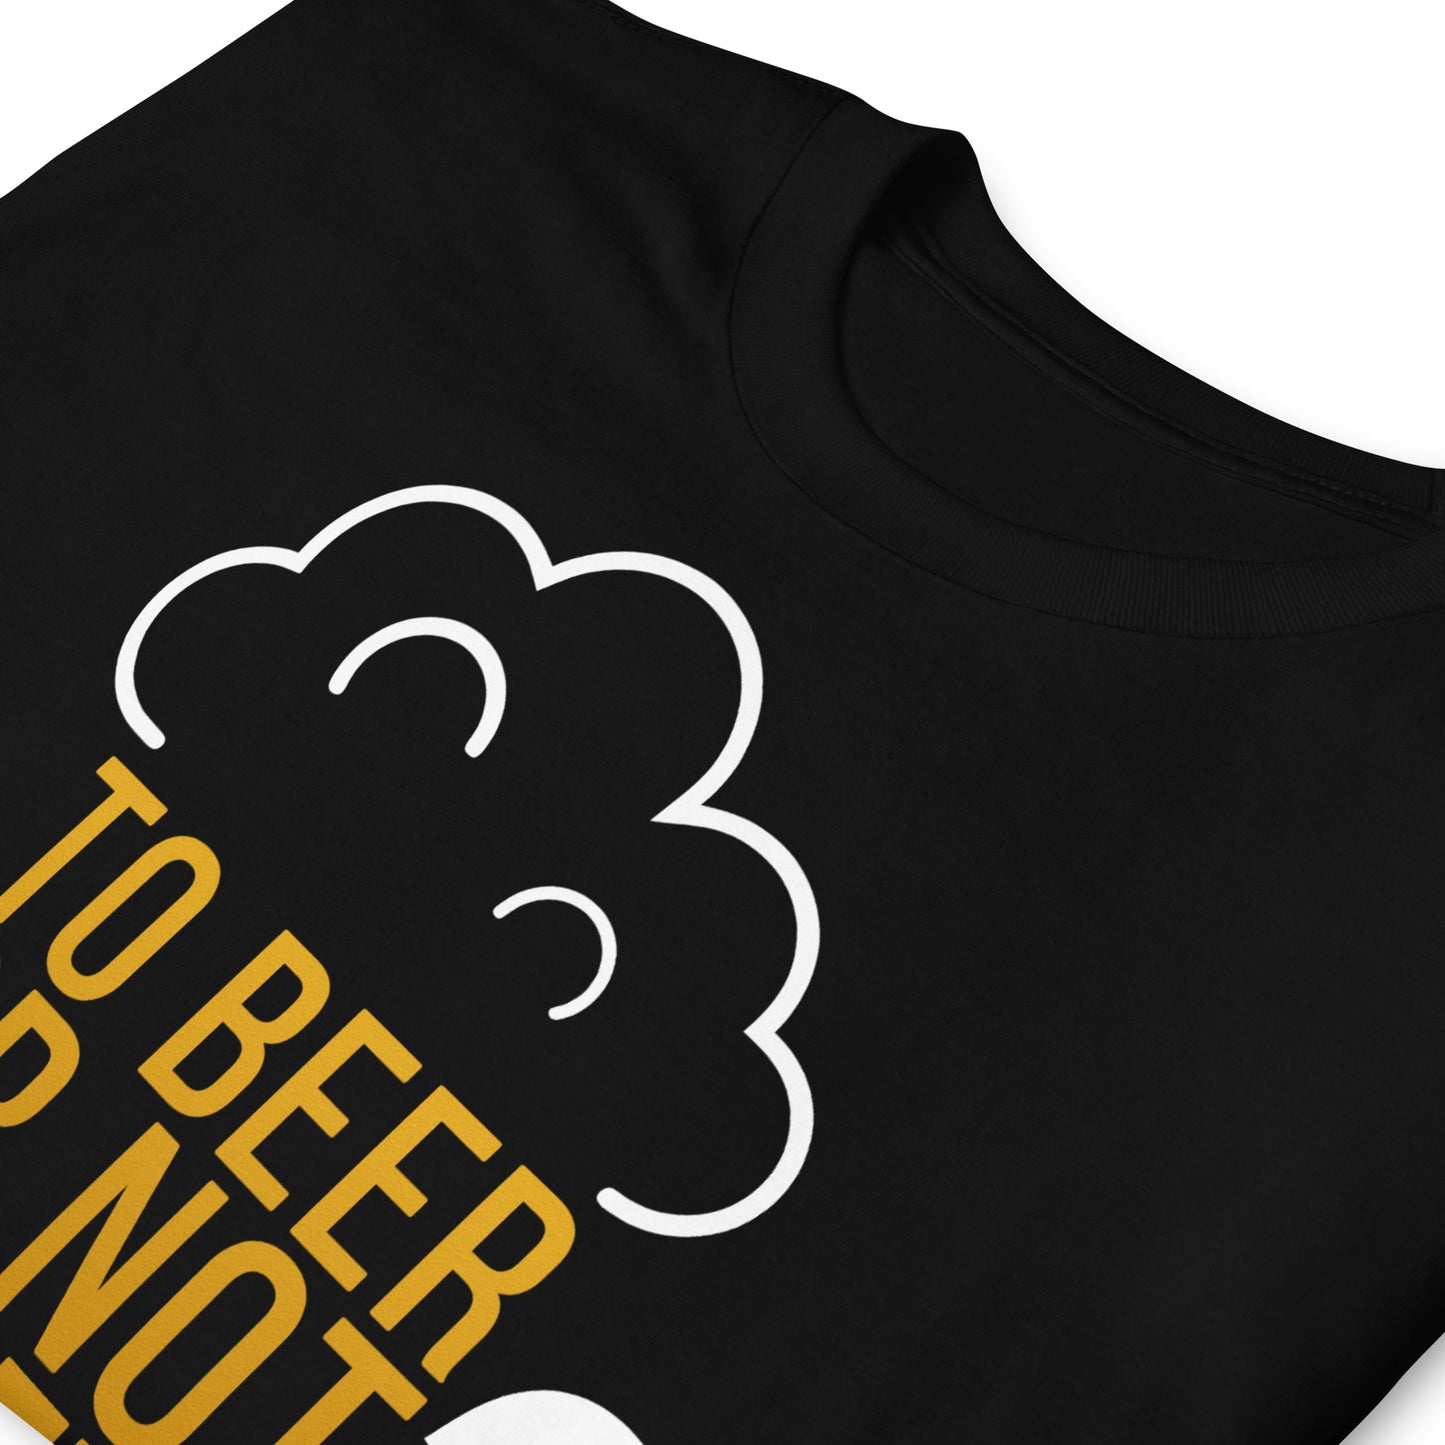 Camiseta To Beer or Not To Beer